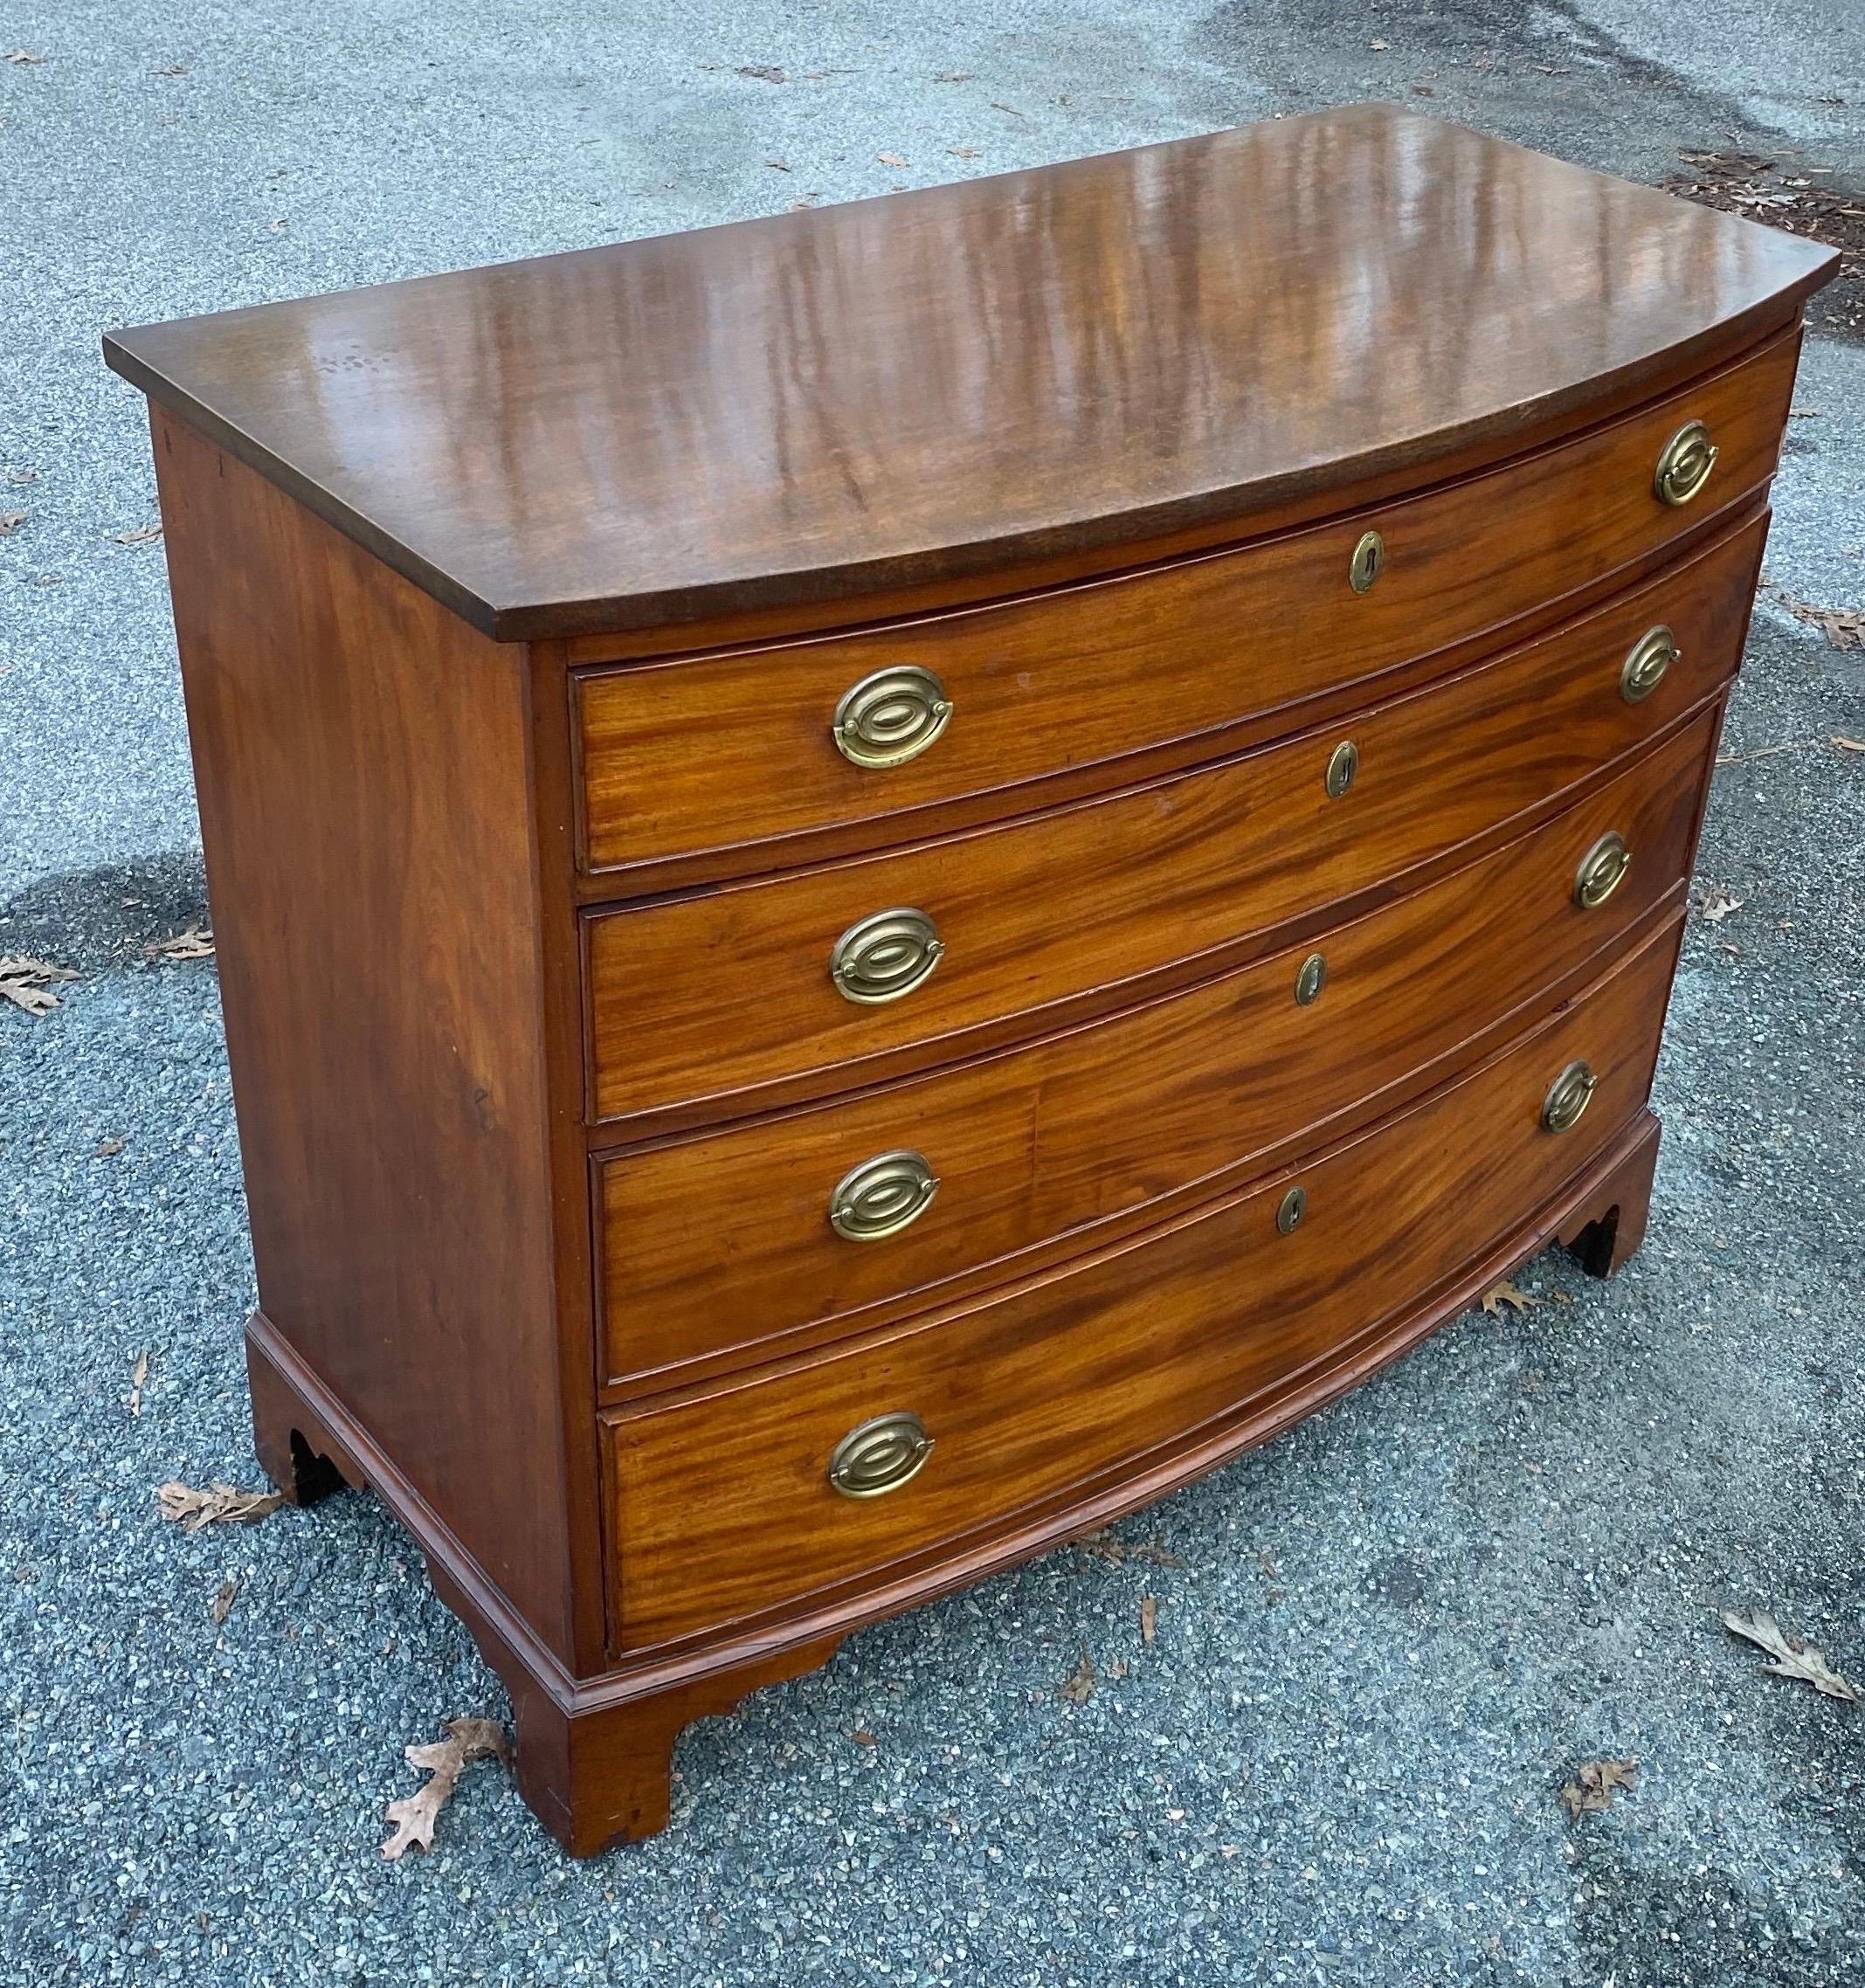 19th Century English 4-Drawer Bowfront Chest of Drawers with Figured Mahogany For Sale 2